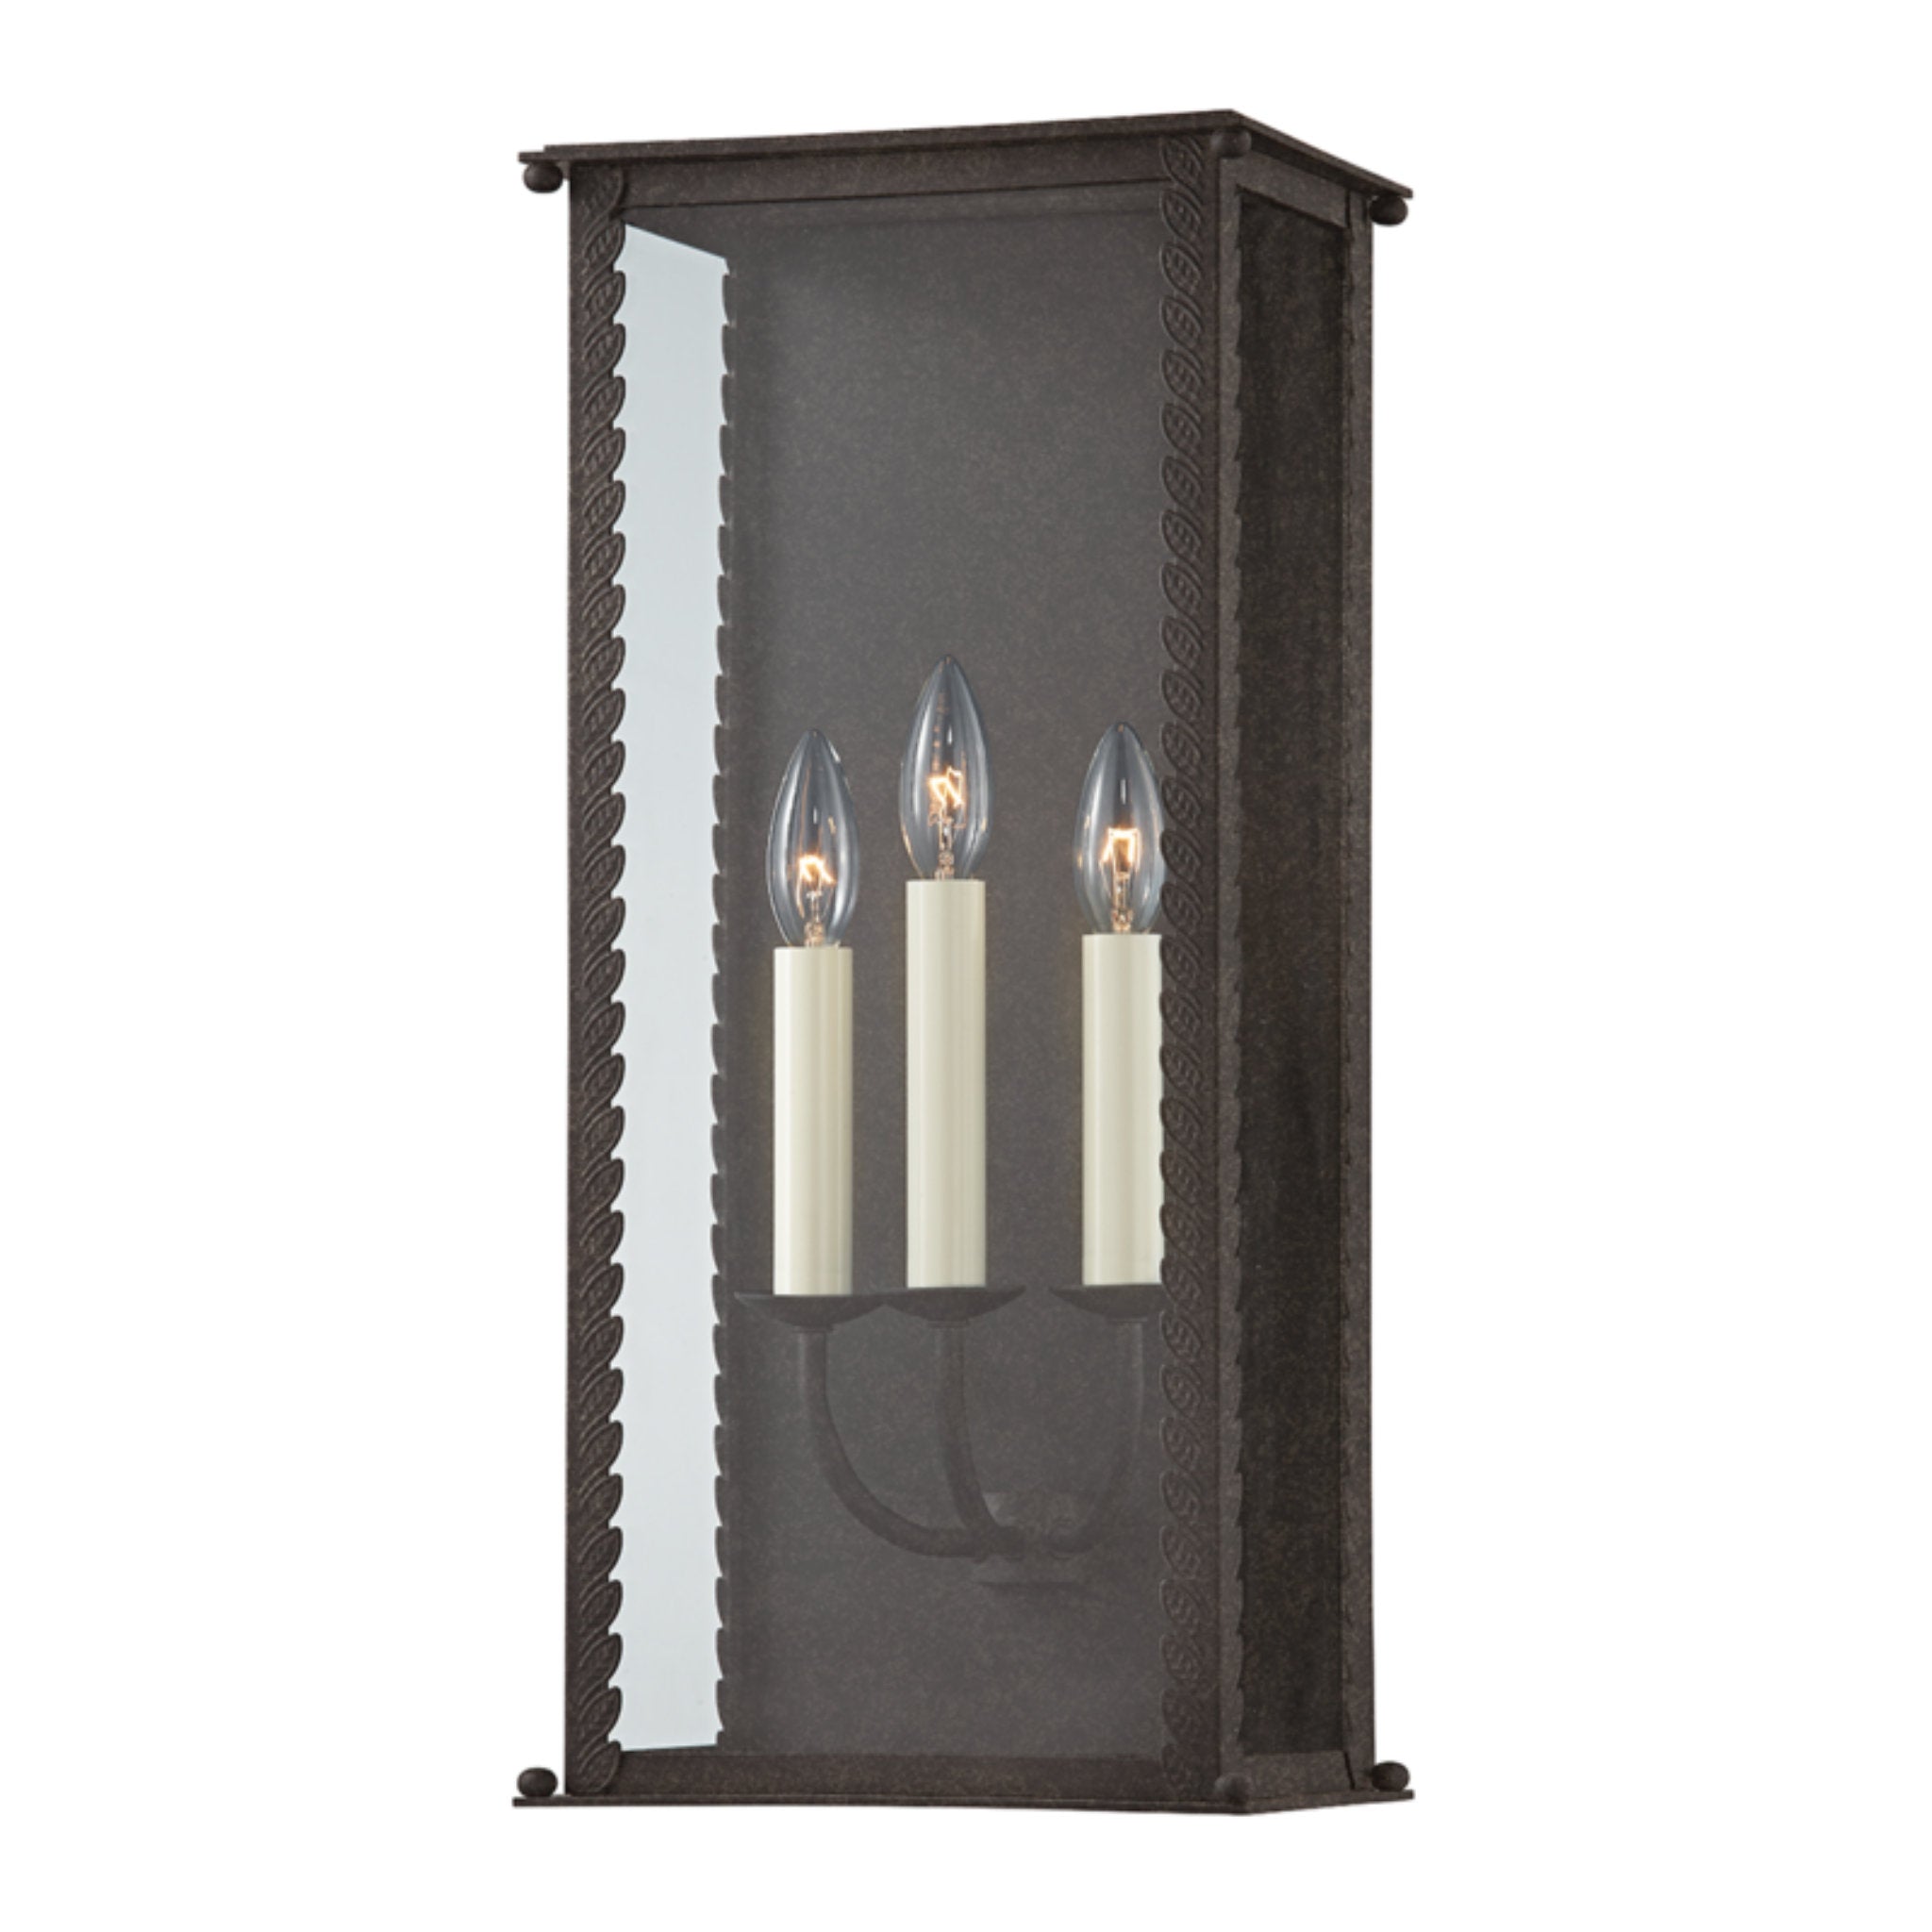 Zuma 3 Light Wall Sconce in French Iron